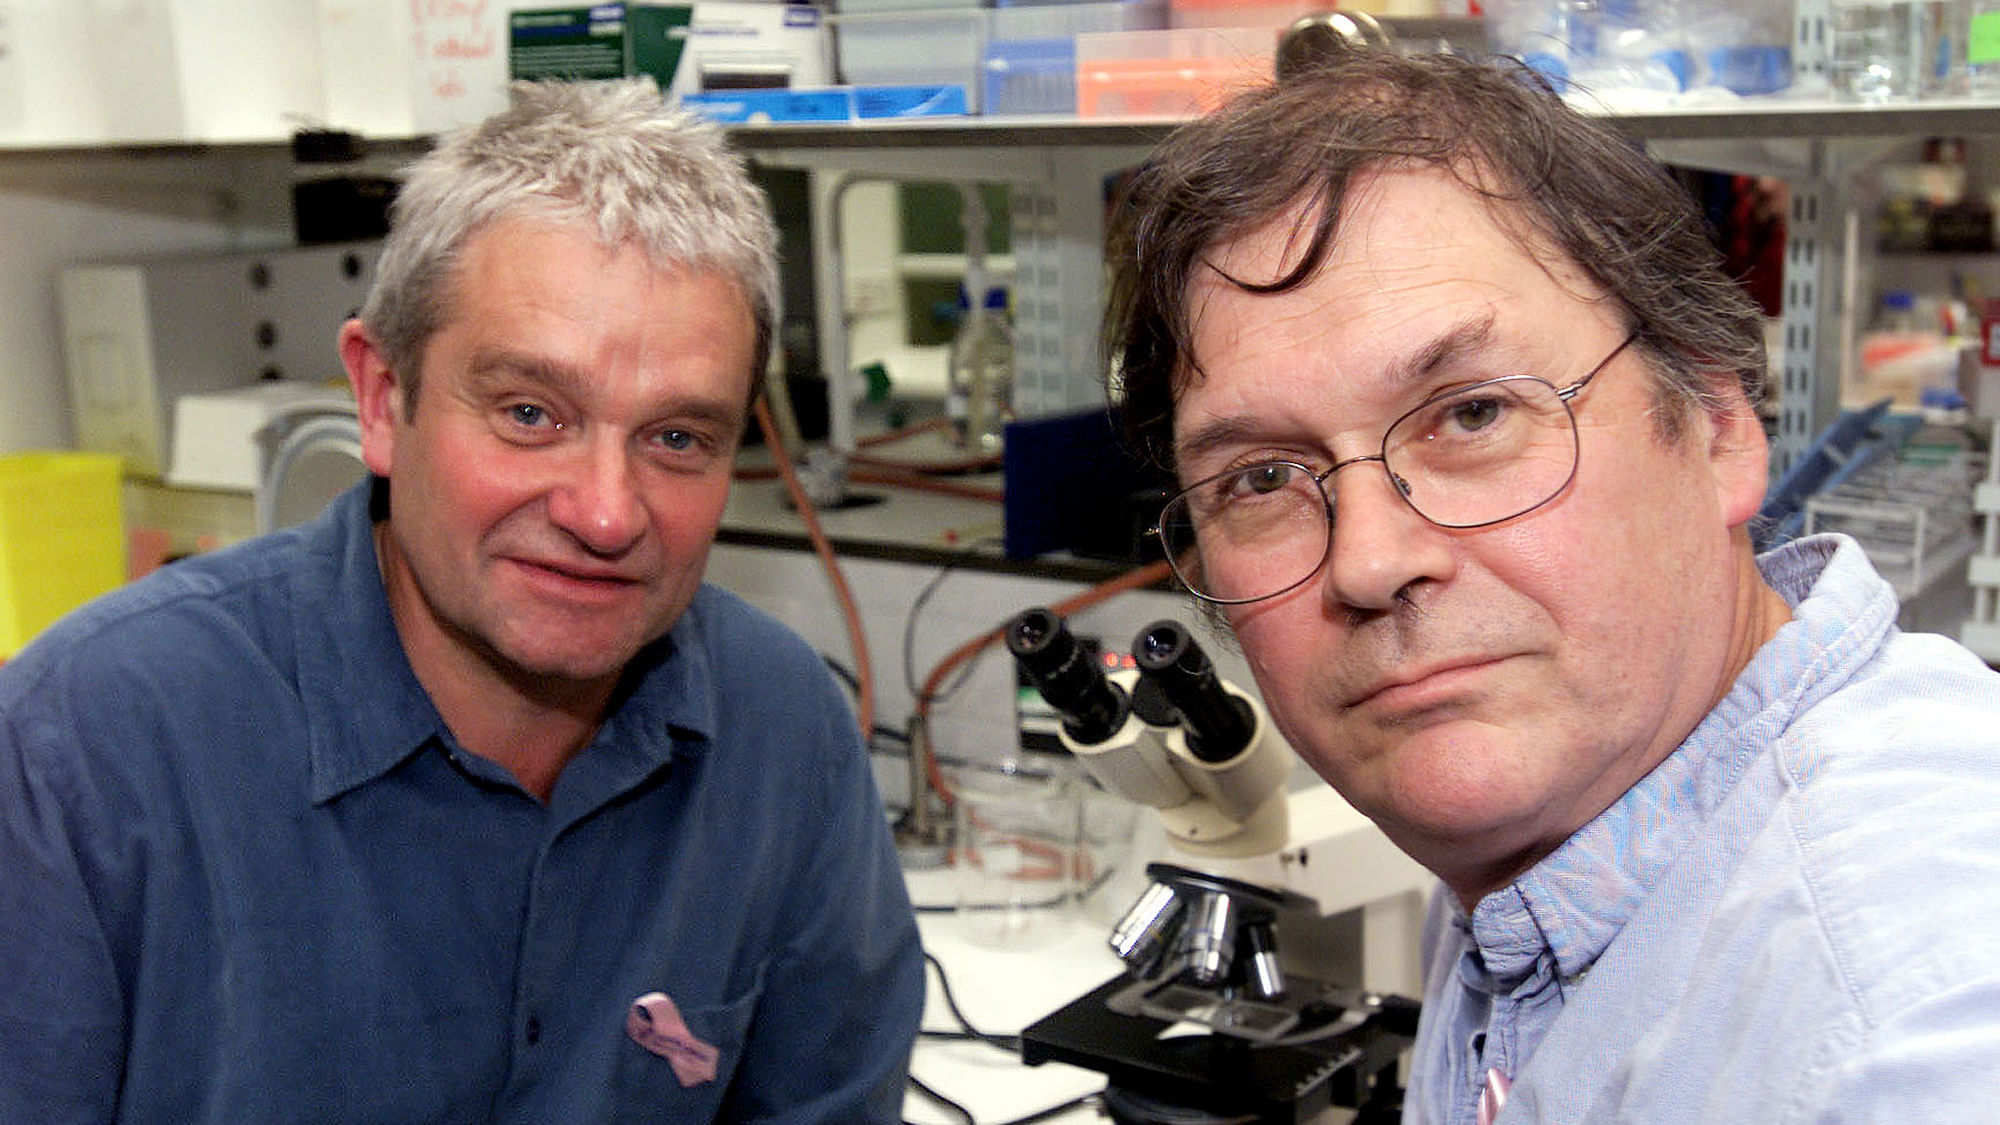 Winners of the 2001 Nobel Prize for Physiology and Medicine Dr Tim Hunt (R) and Sir Paul Nurse. (Photo: Reuters)